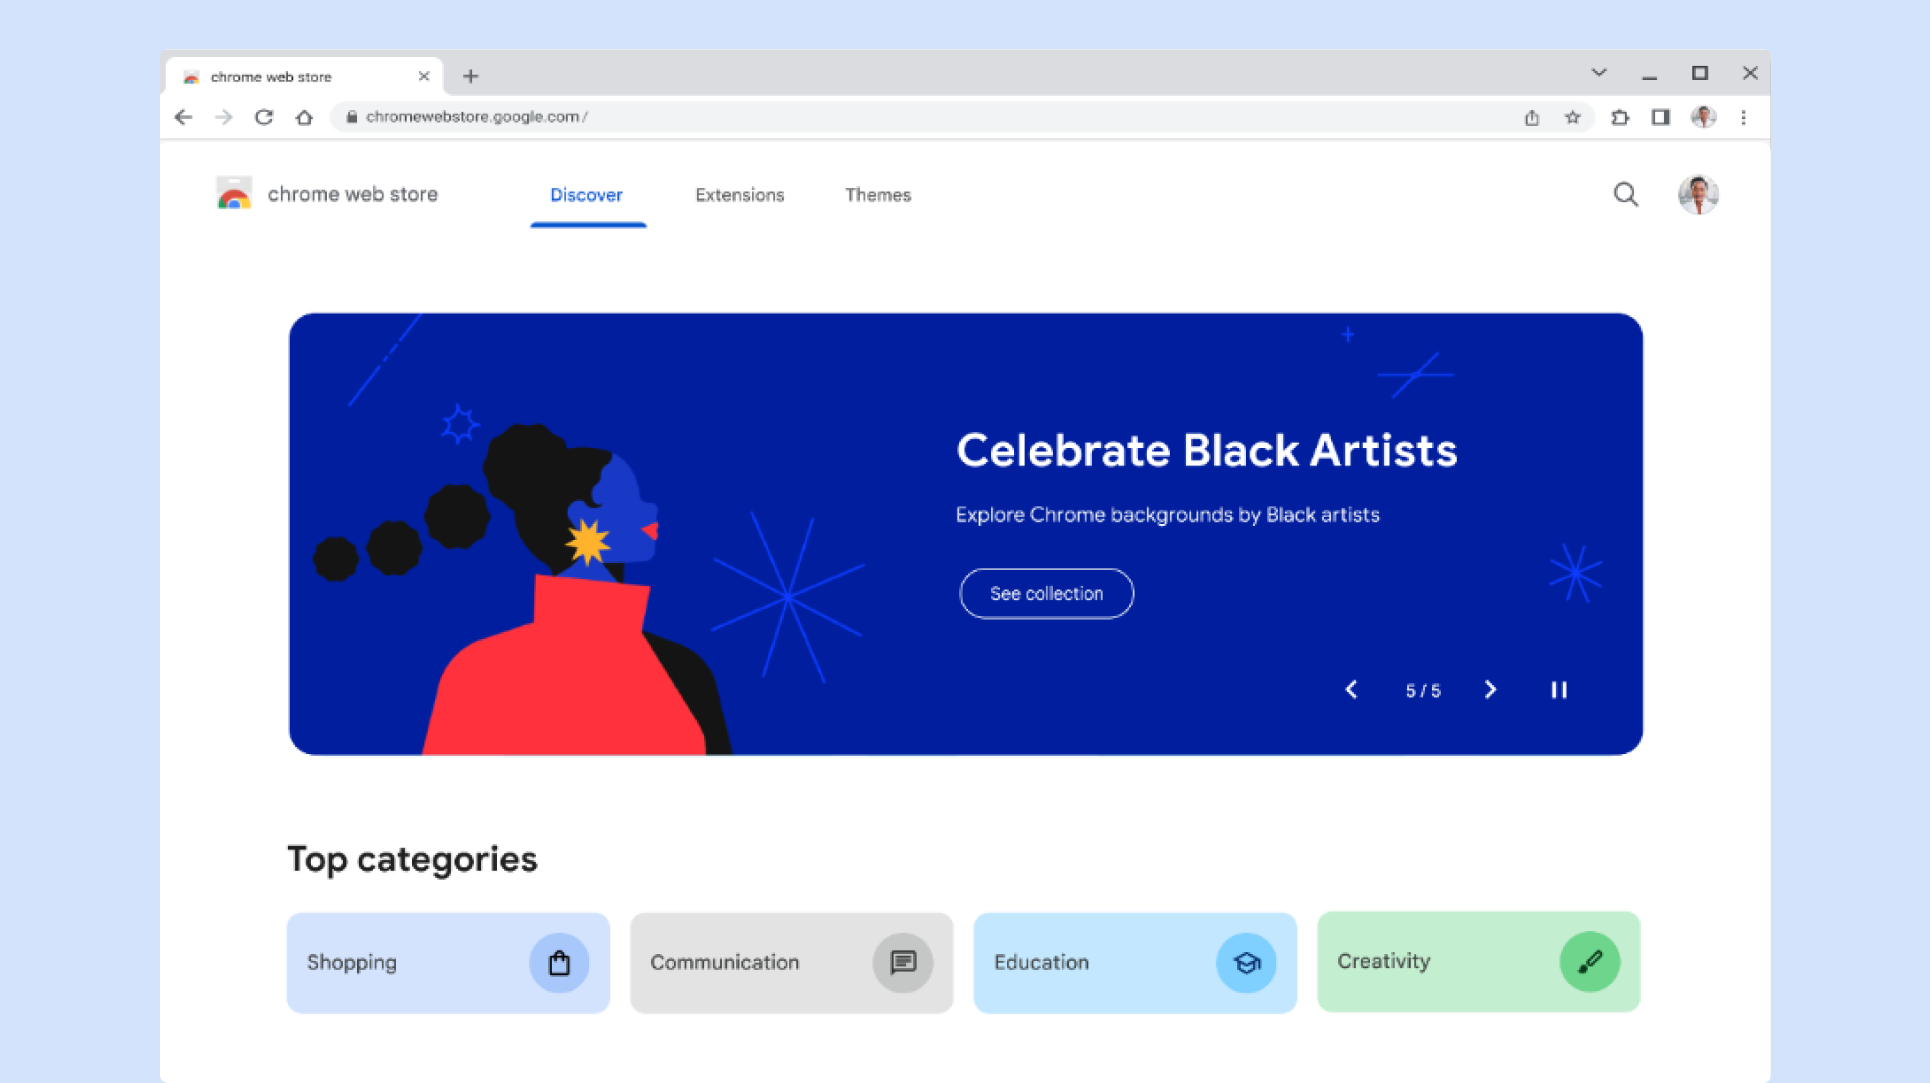 The new Chrome Web Store homepage shows a banner reading “Celebrate Black Artists.” The page scrolls down to show a section called “Editors Picks for you” and “Color themes by Chrome,” stopping at an “Eclipse your Screen” banner for dark mode themes. The cursor moves to click on a Honeysuckle Chrome theme.